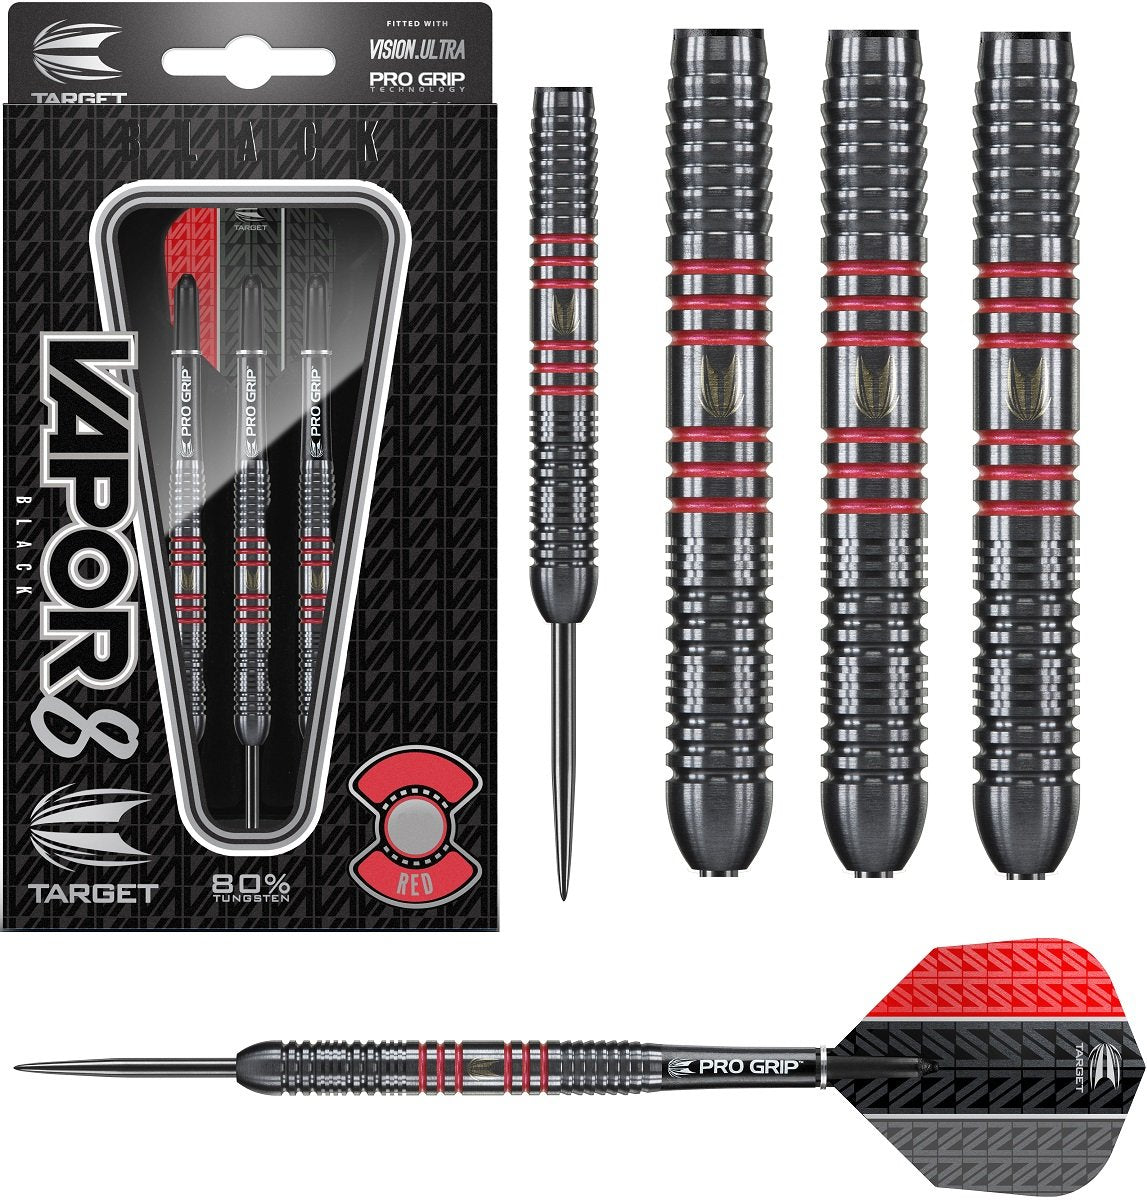 Vapor Black with Red Rings Steel Tip Darts by Target Vapor8 – Double  Top Darts